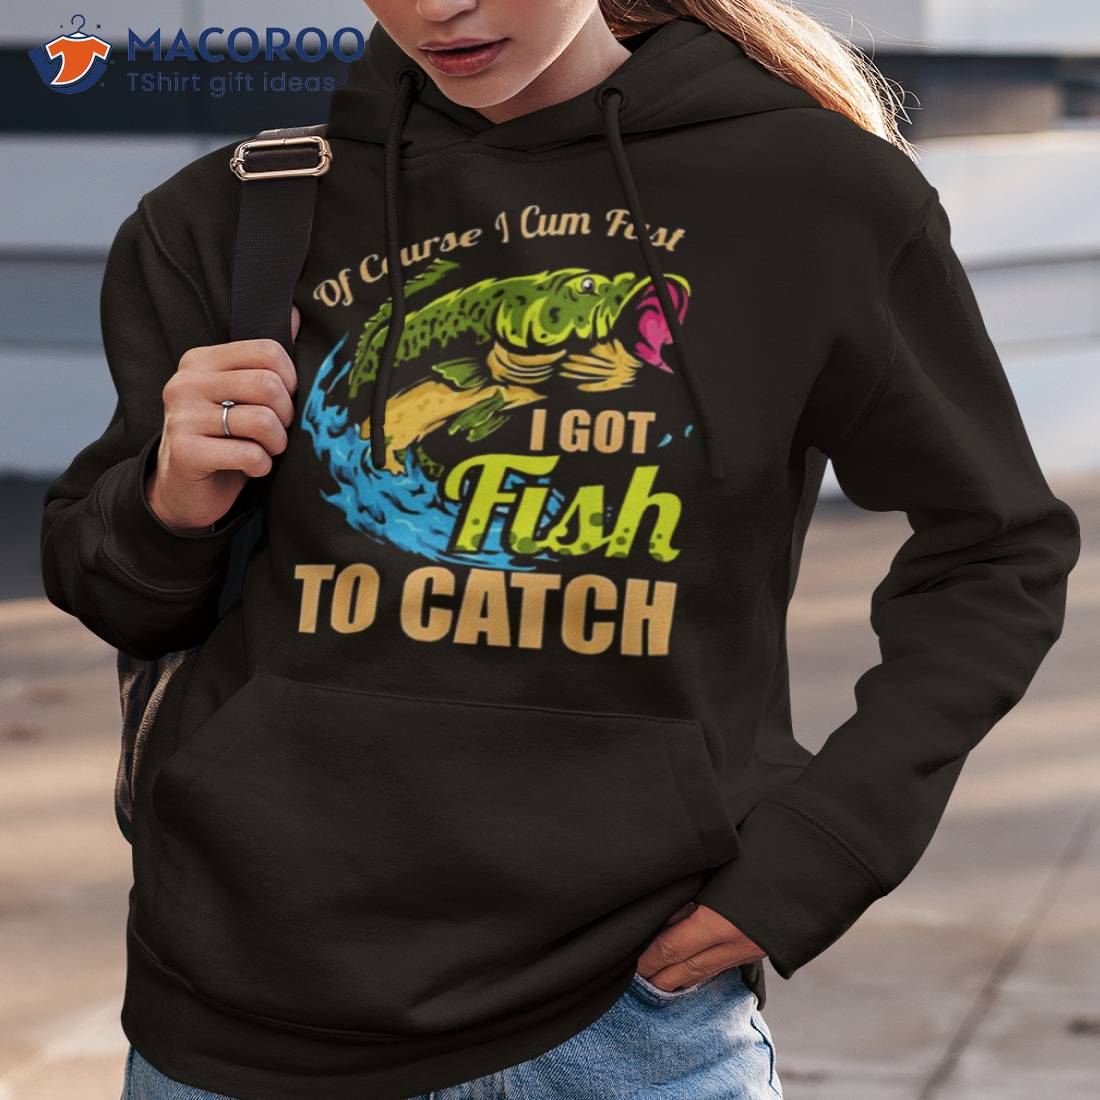 https://images.macoroo.com/wp-content/uploads/2023/05/of-course-i-come-fast-i-got-fish-to-catch-fishing-shirt-hoodie-3.jpg